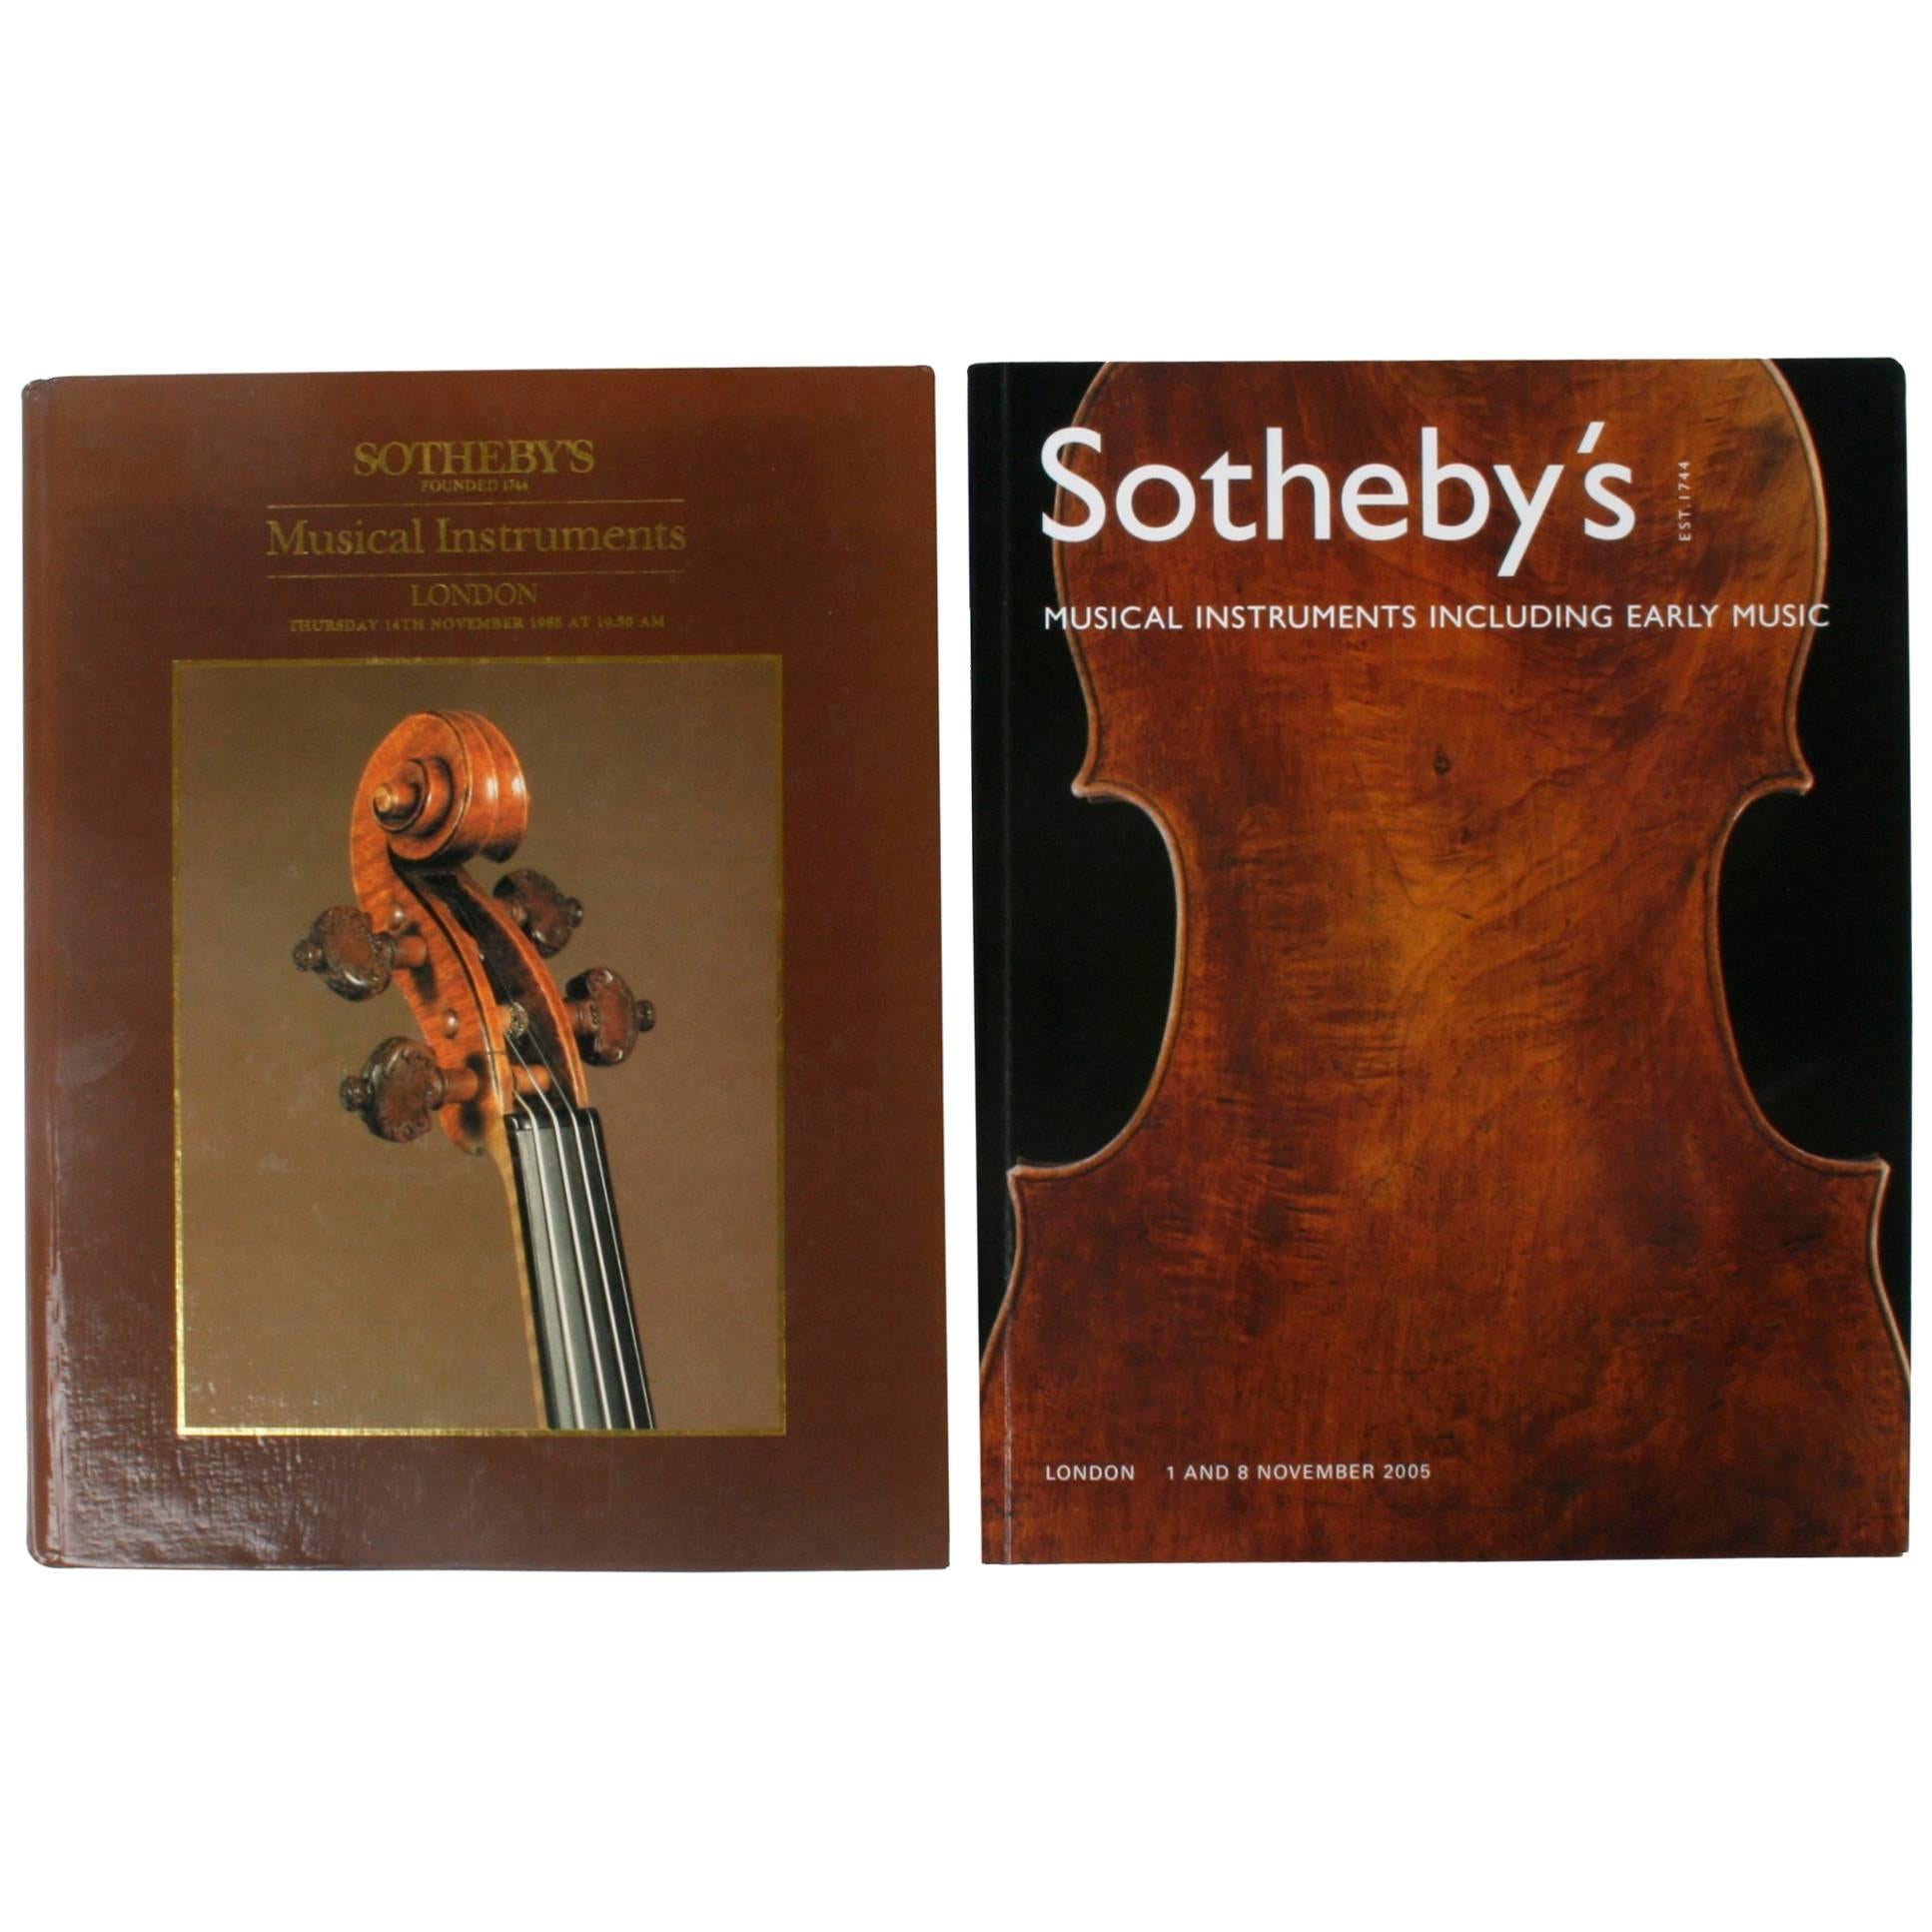 Two Sotheby's London Auction Catalogues on Musical Instruments For Sale